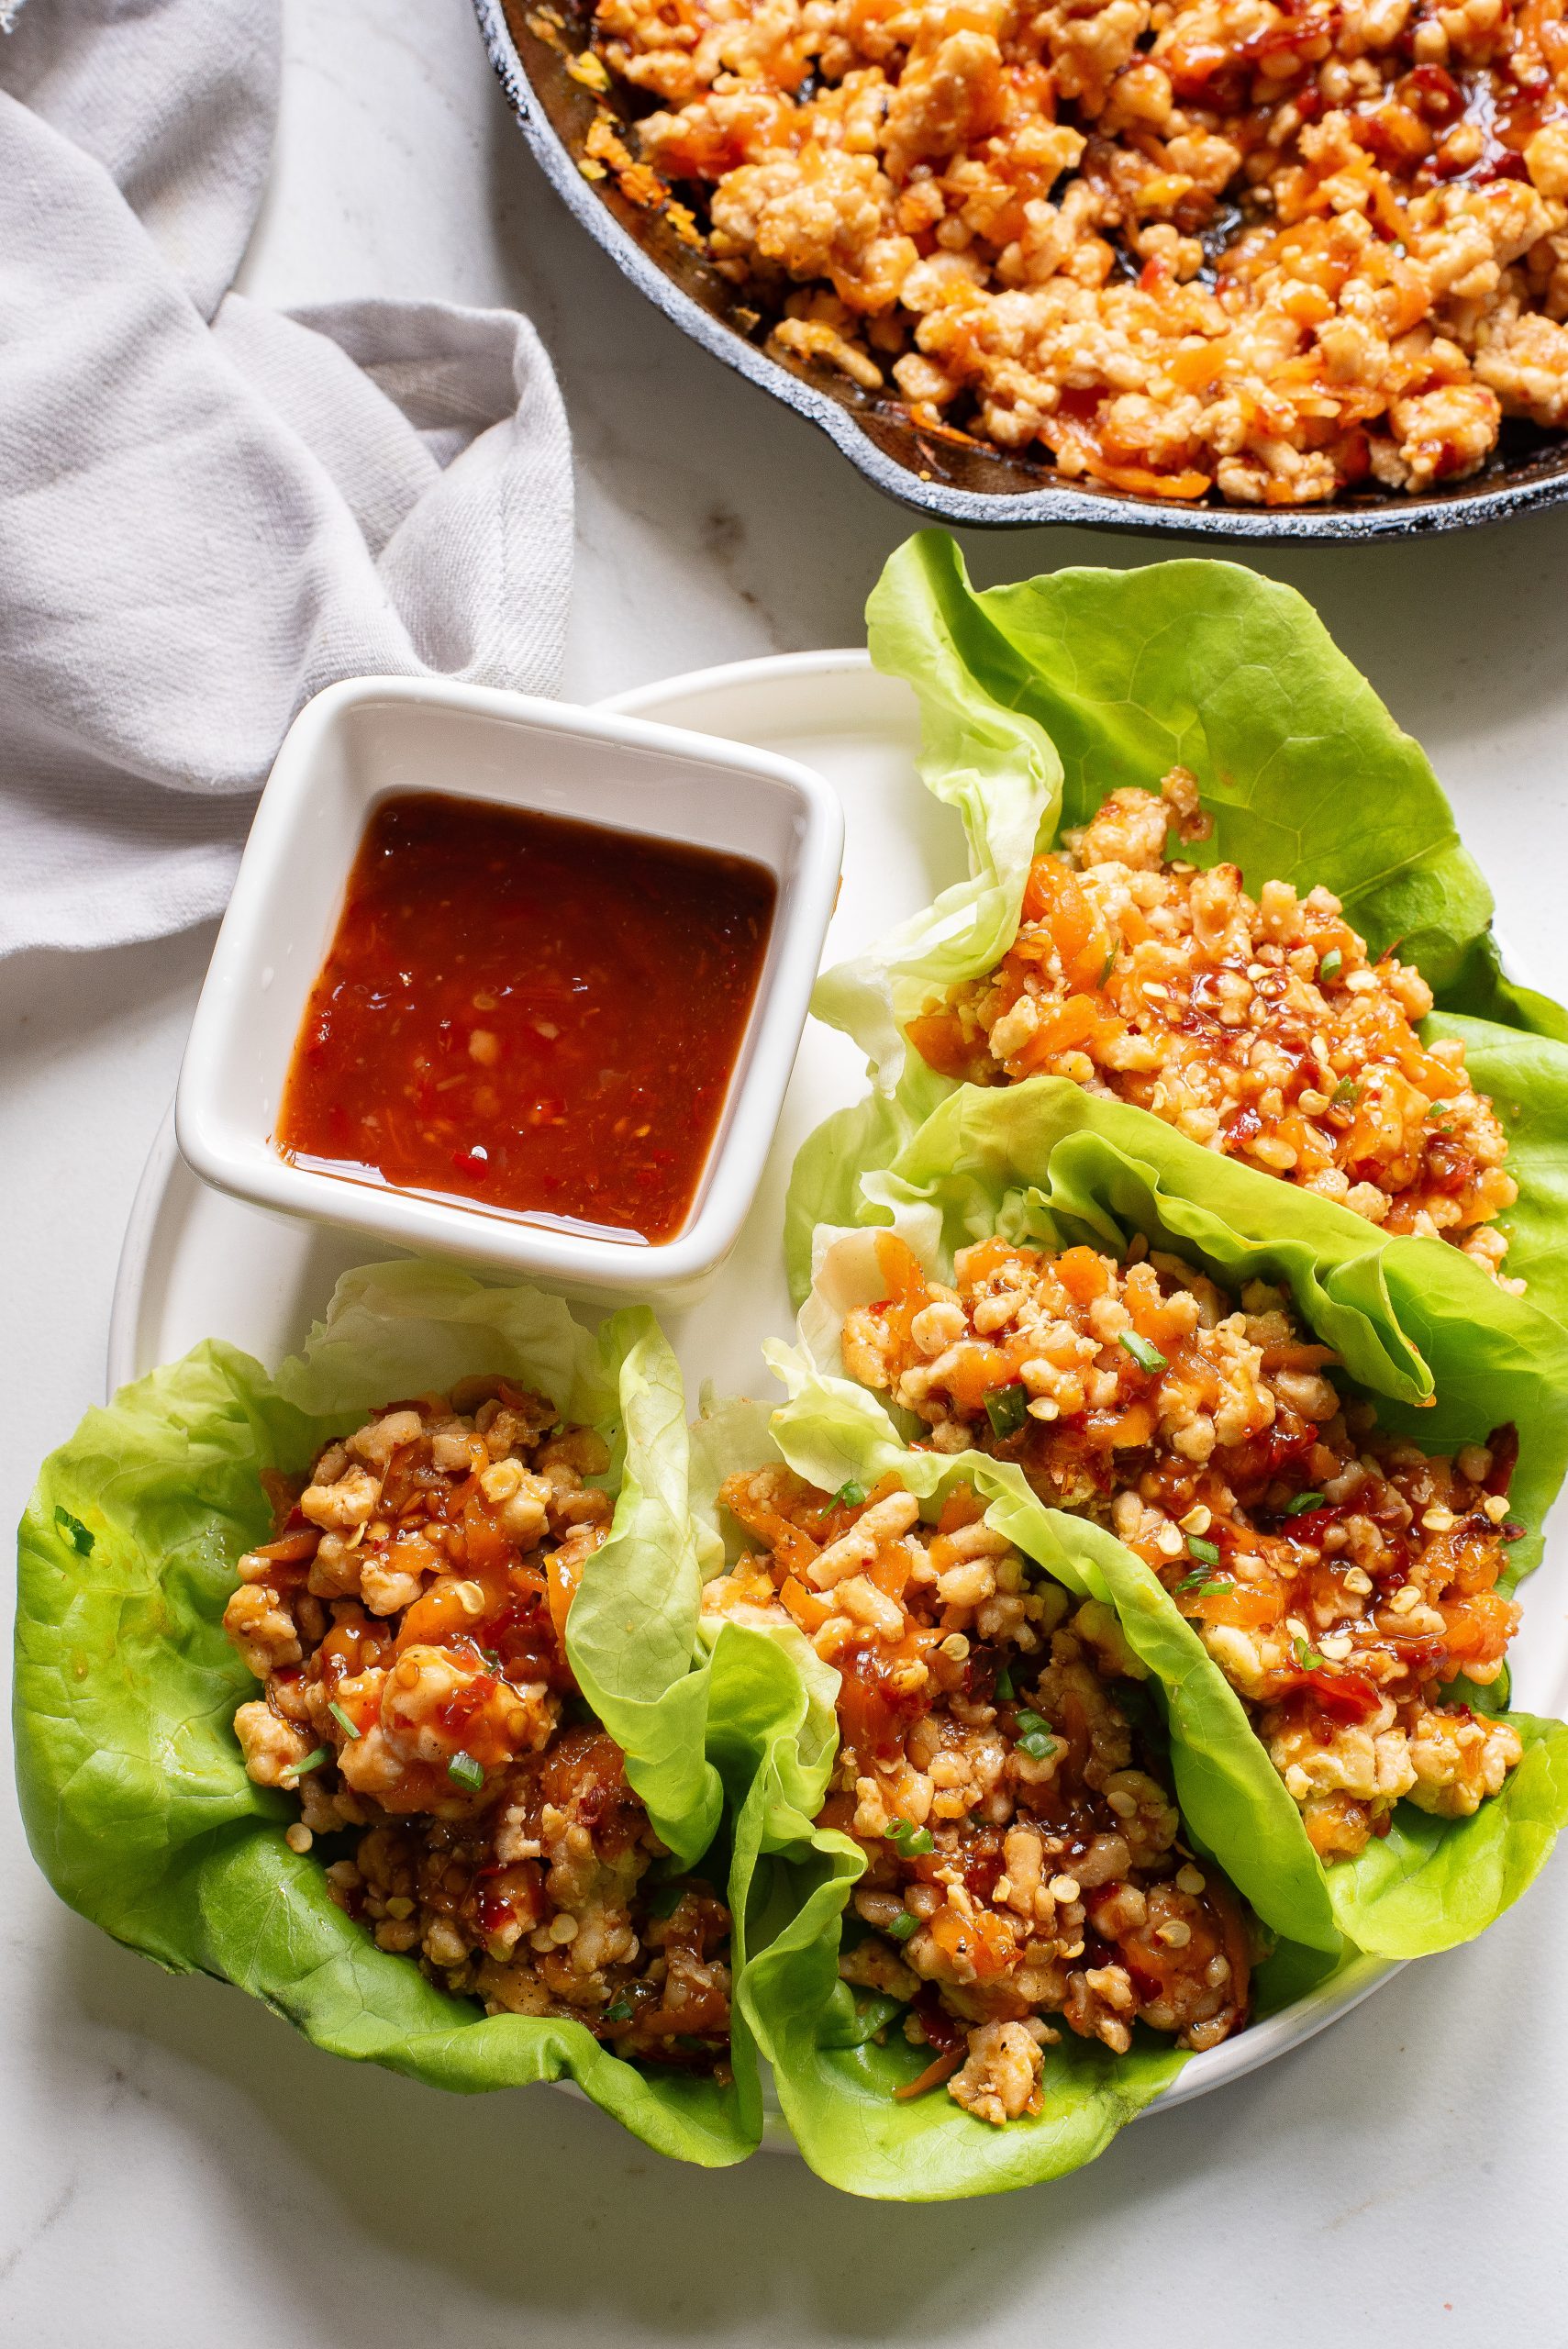 A plate of chicken lettuce wraps with a side of spicy sauce, served alongside a skillet of extra filling.